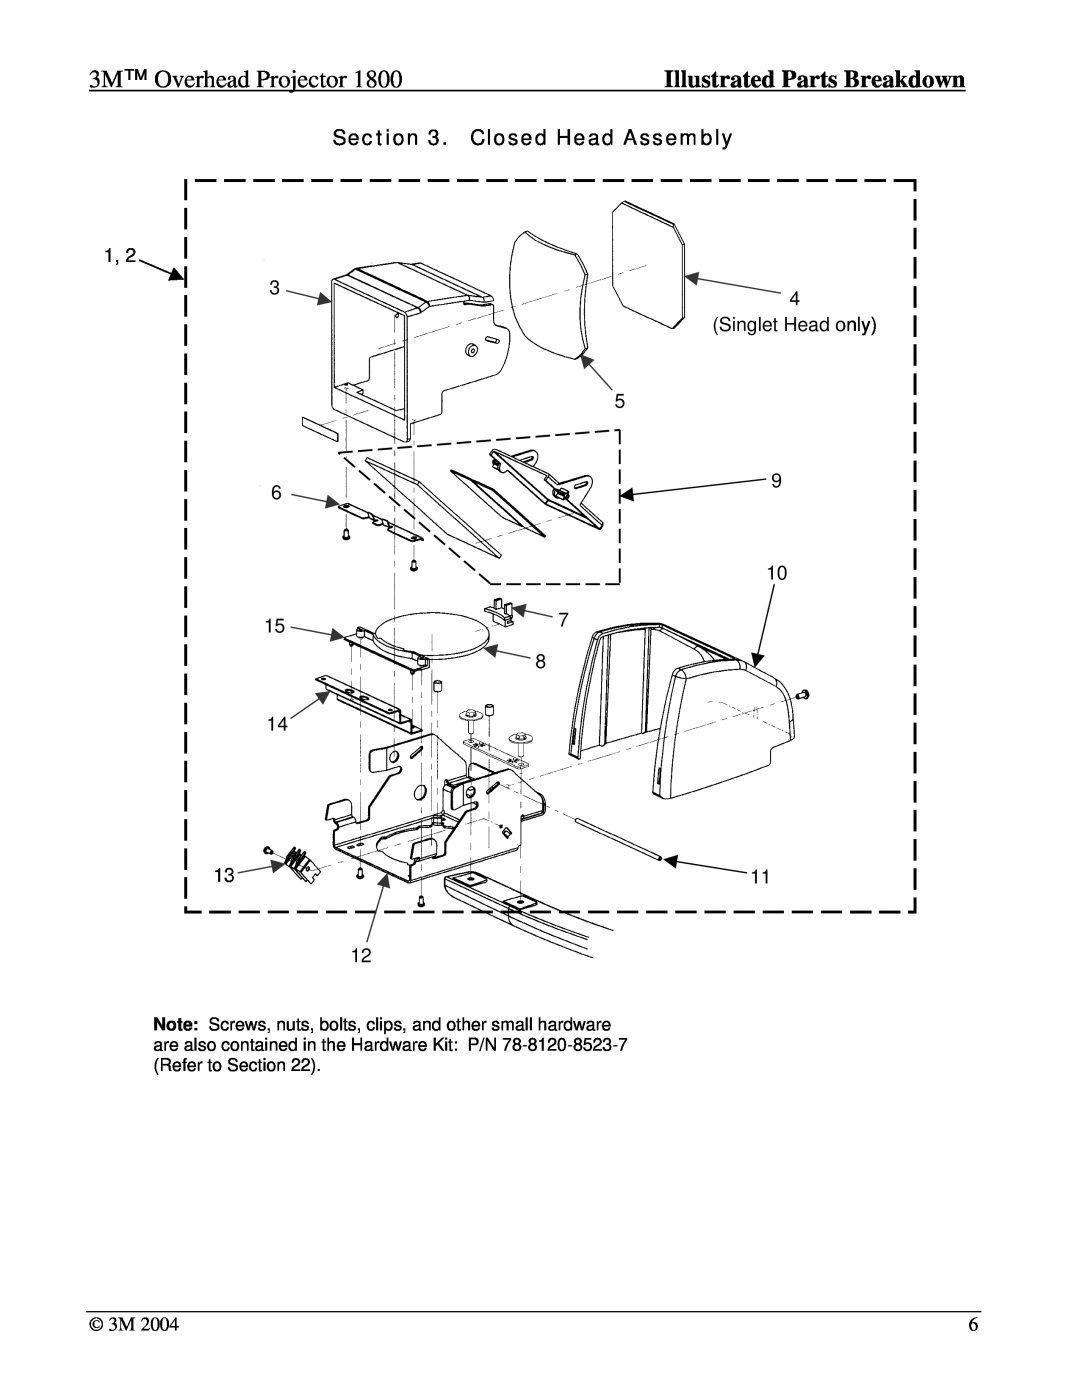 3M 1800 manual 3M Overhead Projector, Closed Head Assembly, Illustrated Parts Breakdown 